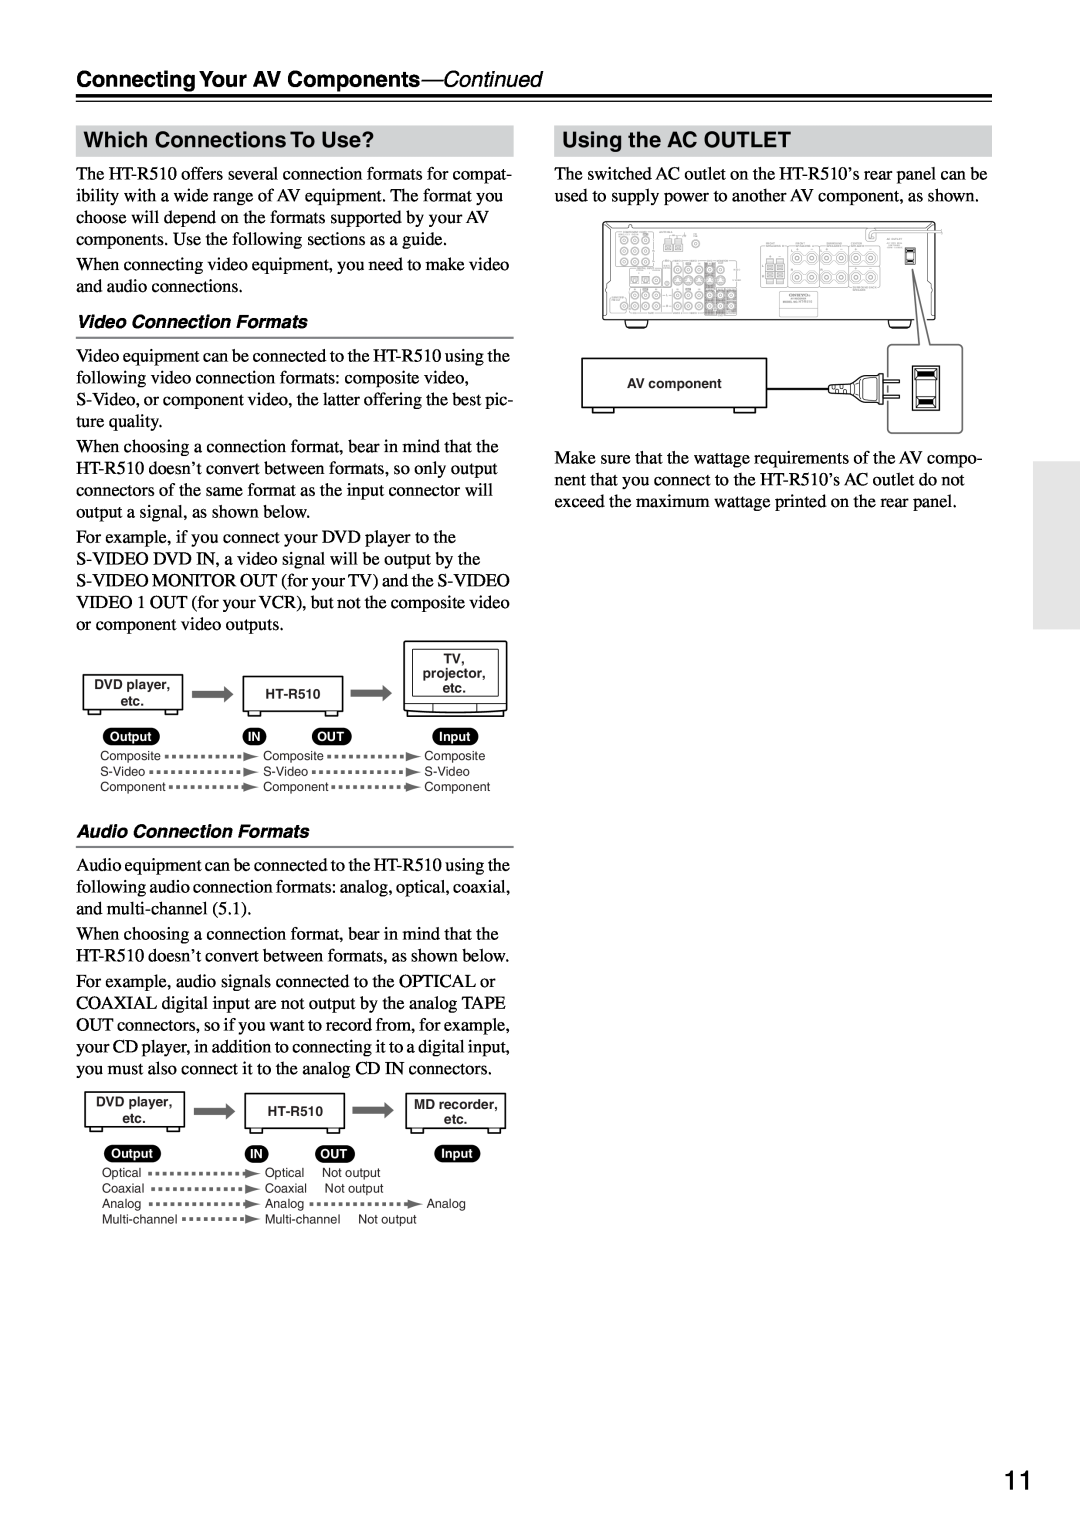 Onkyo HT-R510 instruction manual Connecting Your AV Components-Continued, Which Connections To Use?, Using the AC OUTLET 